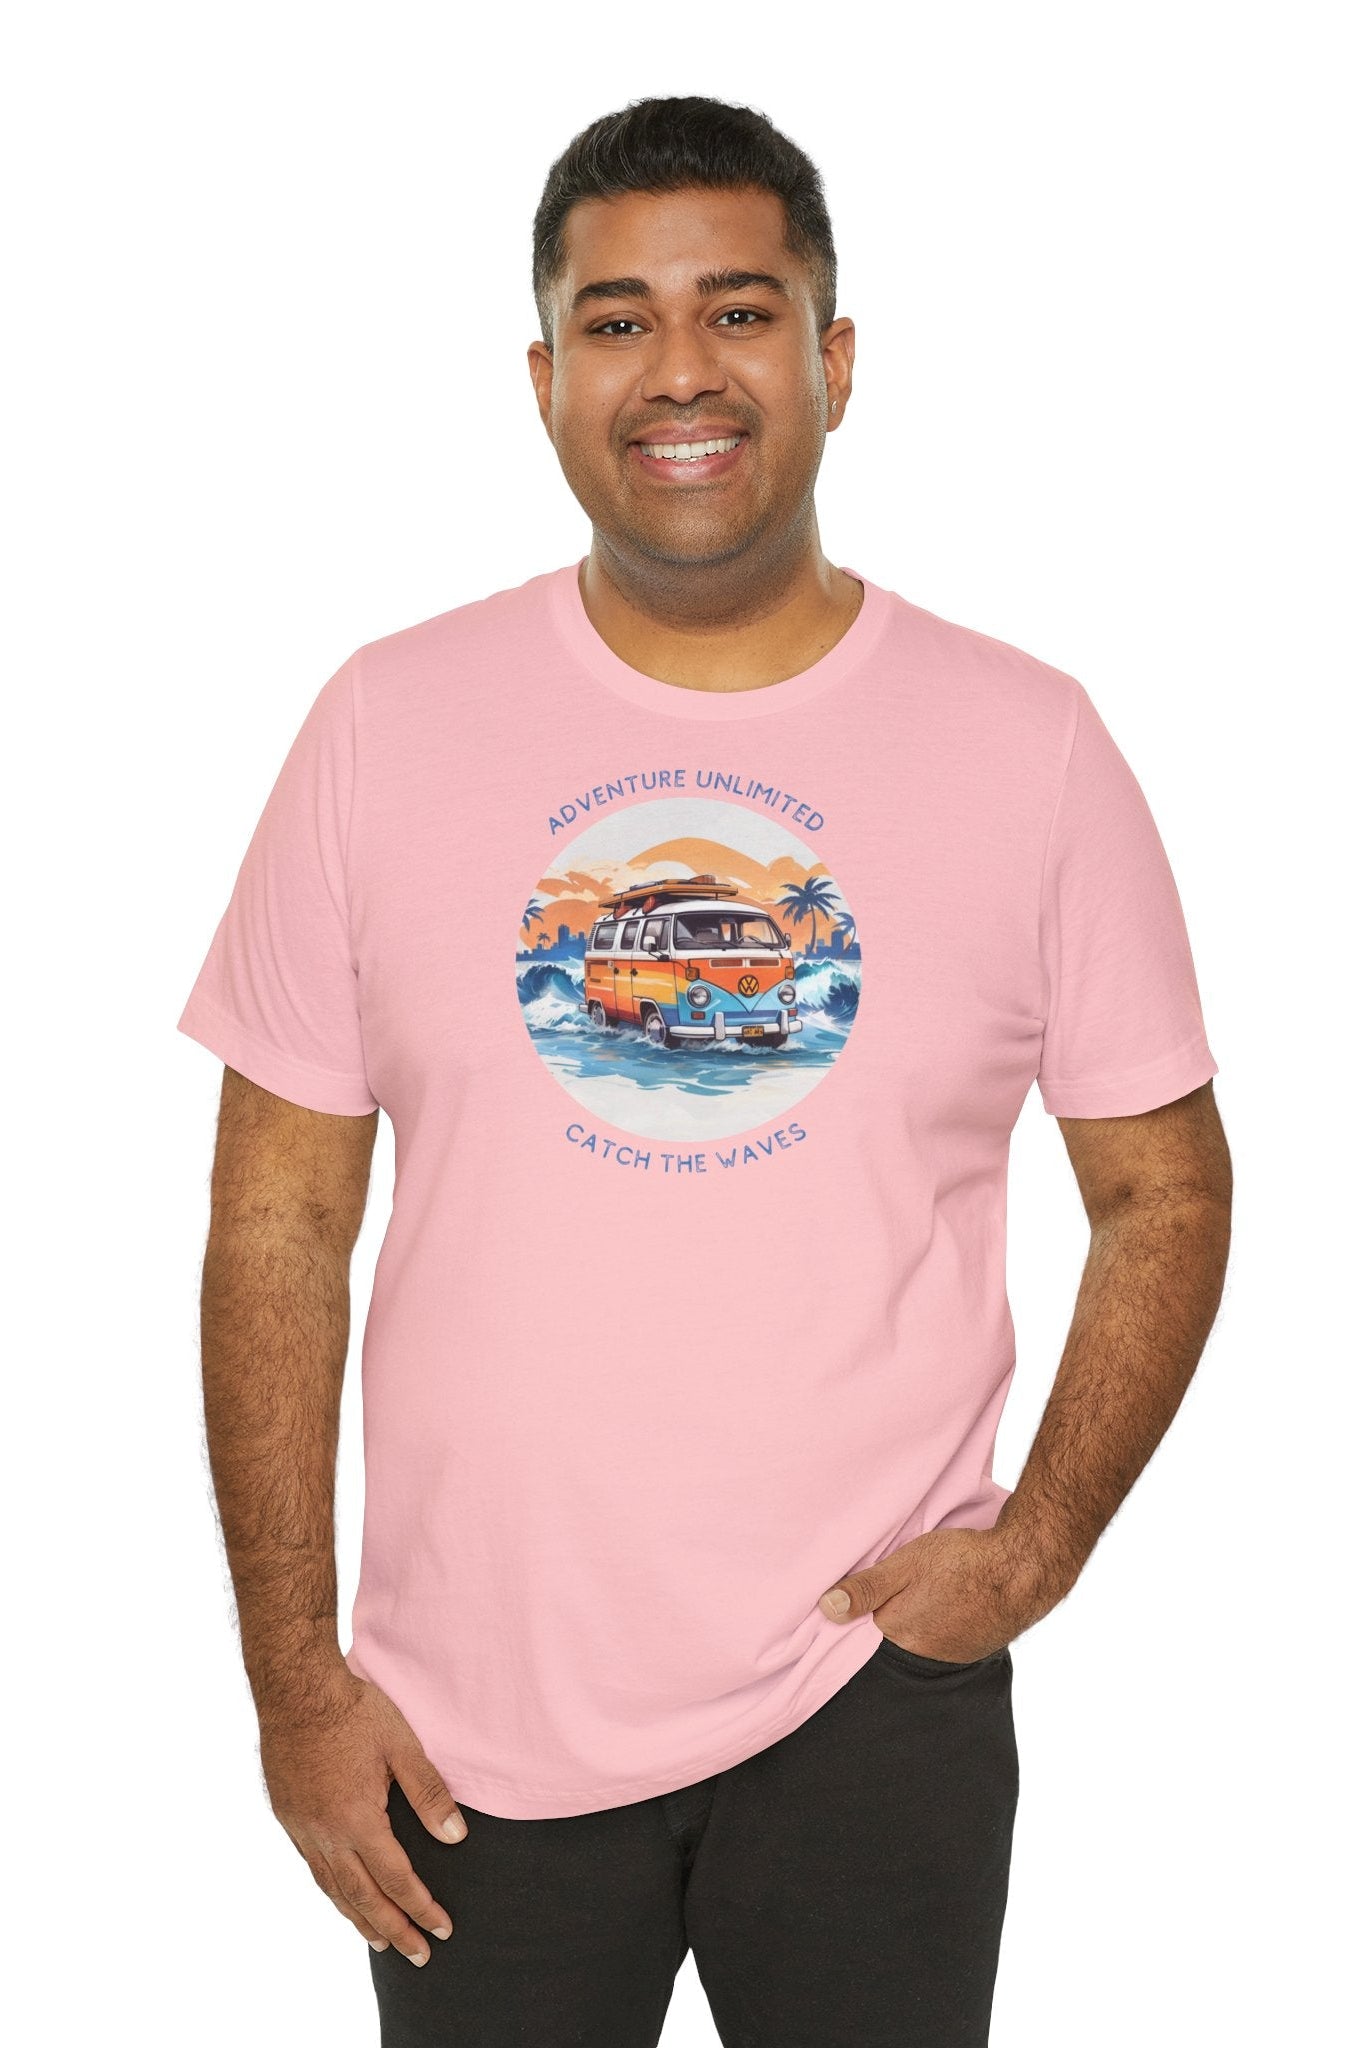 Adventure Unlimited surfing t-shirt with man wearing pink t-shirt and surfboard design, printed direct-to-garment